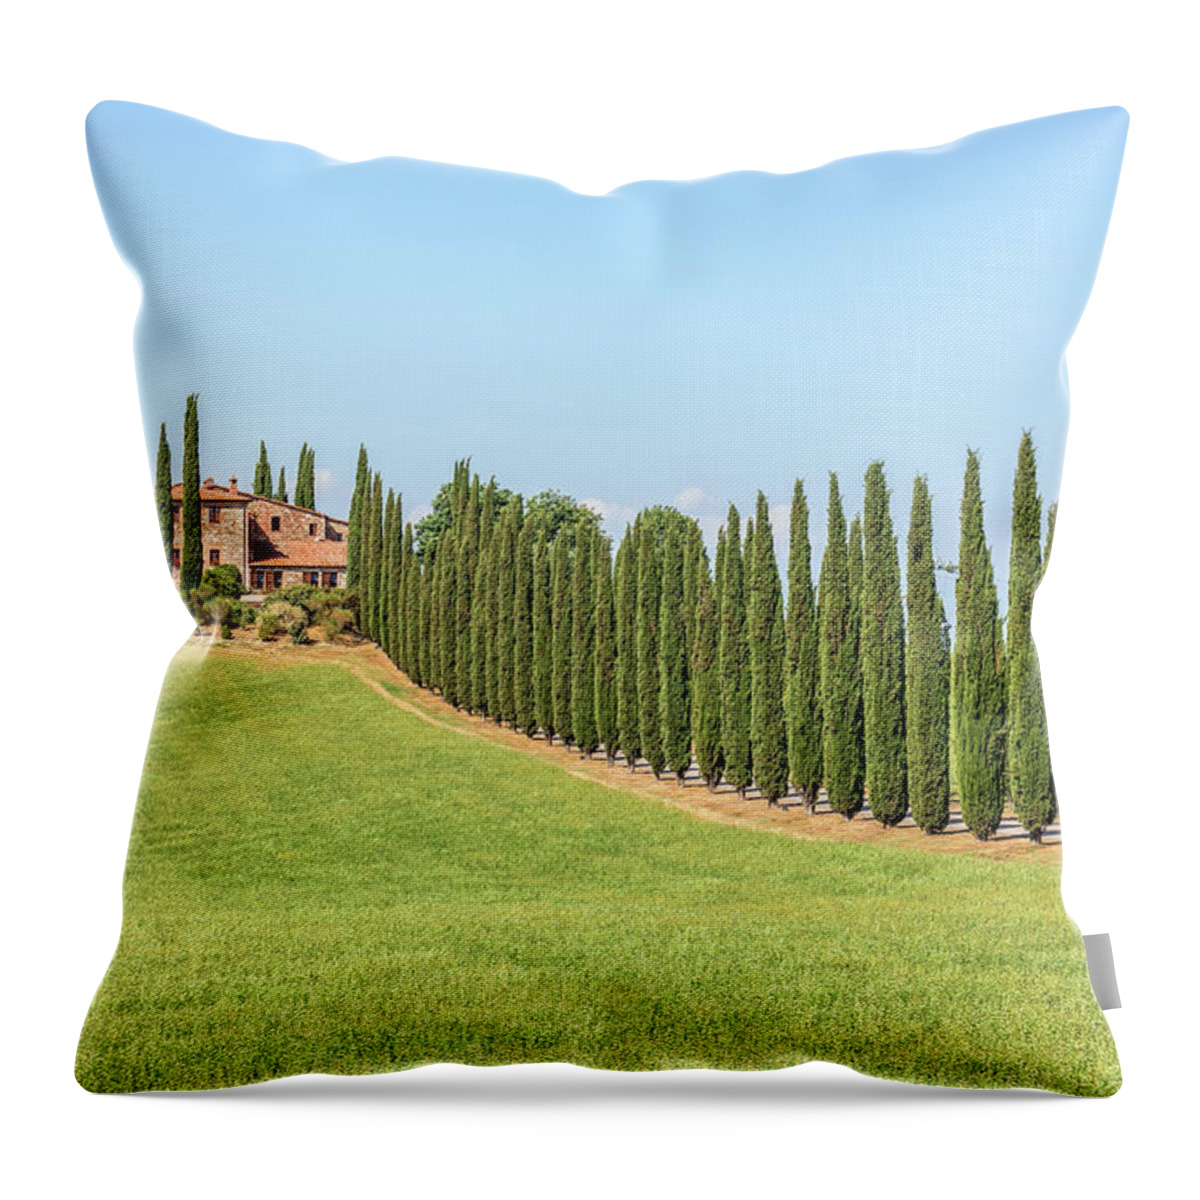 Podere Throw Pillow featuring the photograph San Quirico, Tuscany - Italy #10 by Joana Kruse